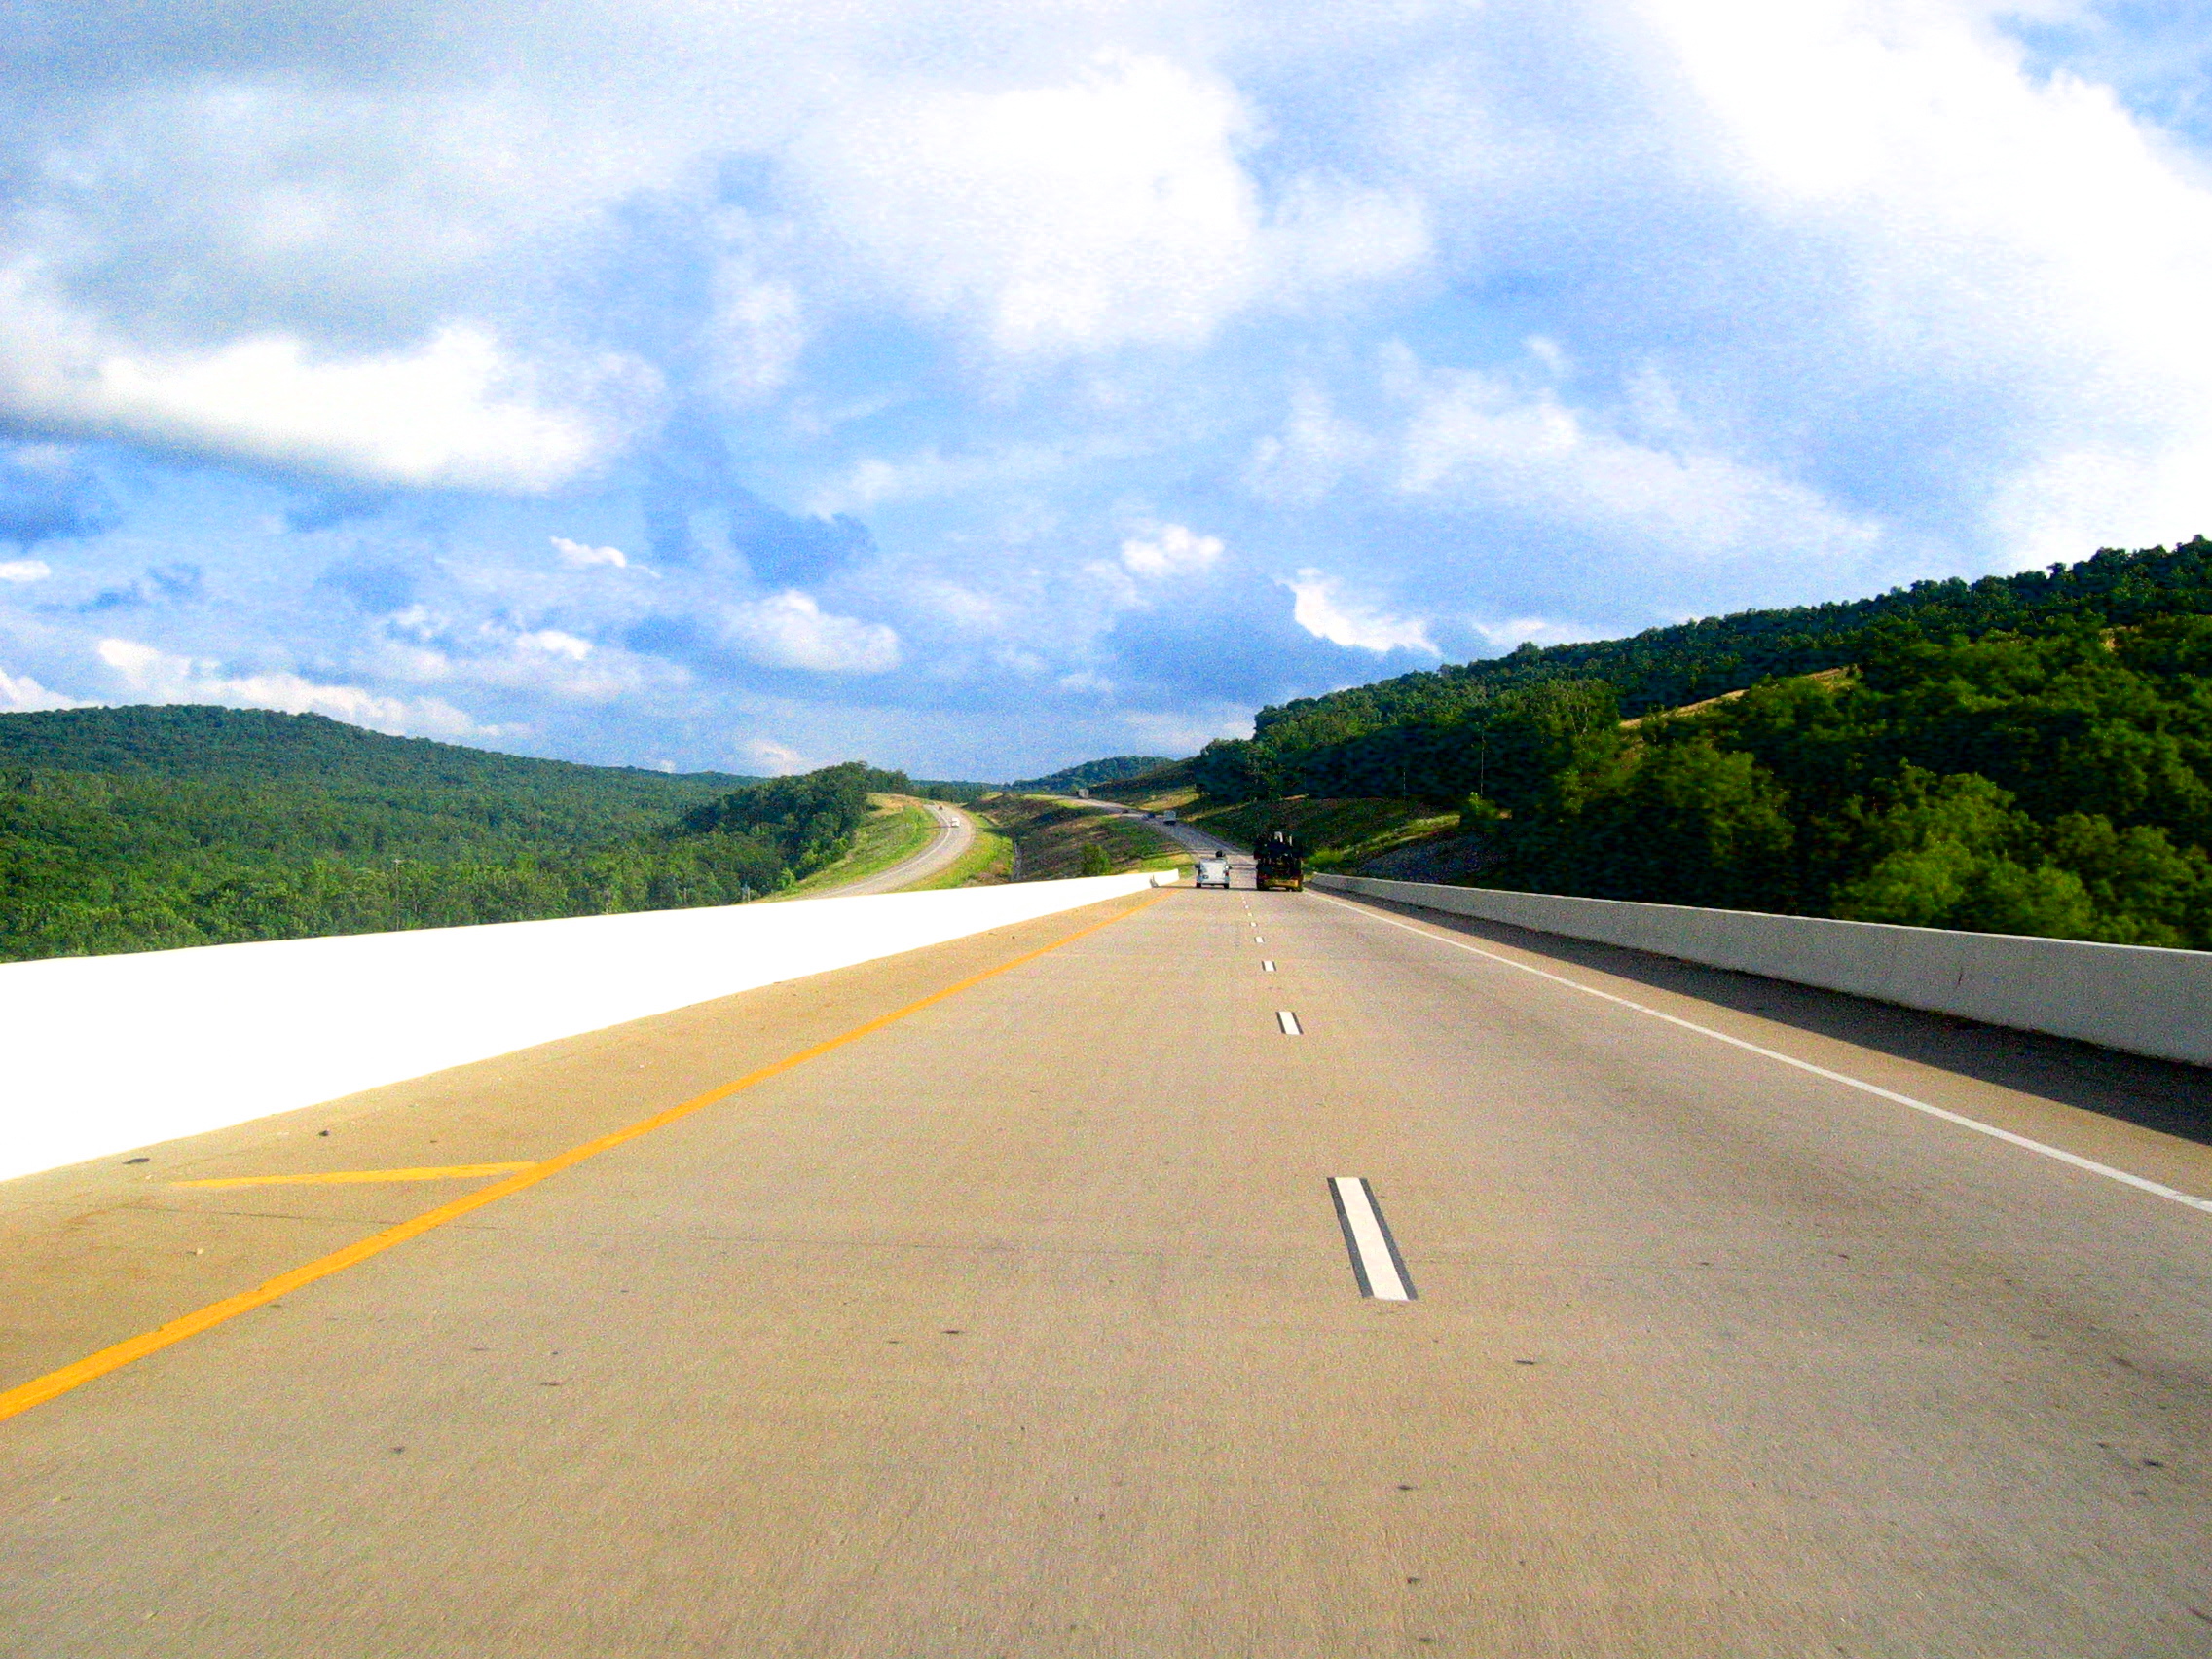 View image - Beautiful Highway - Abstract Influence